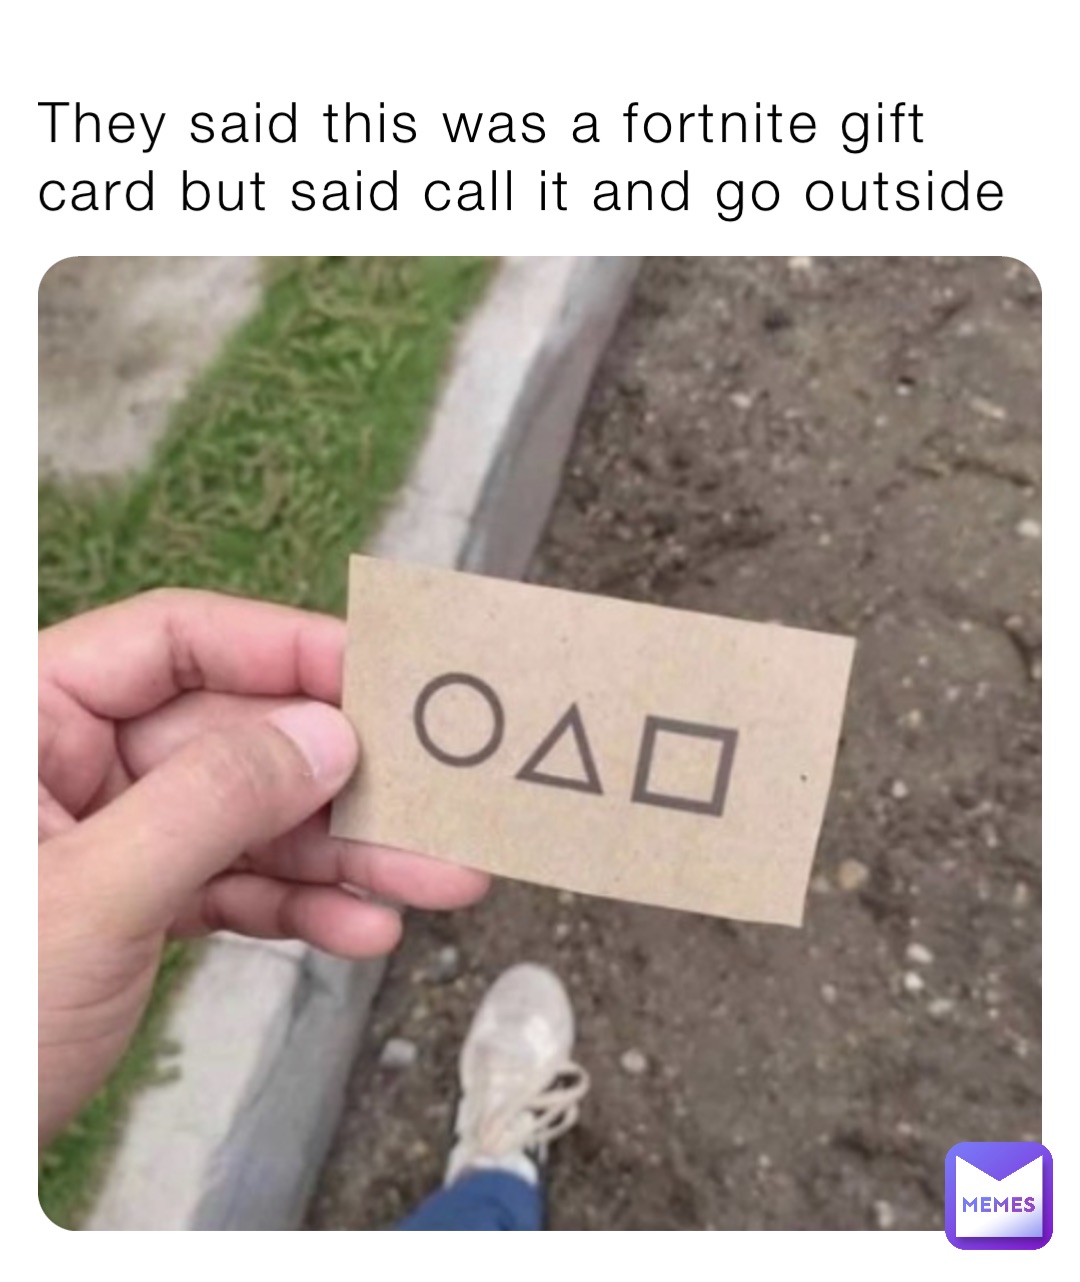 They said this was a fortnite gift card but said call it and go outside